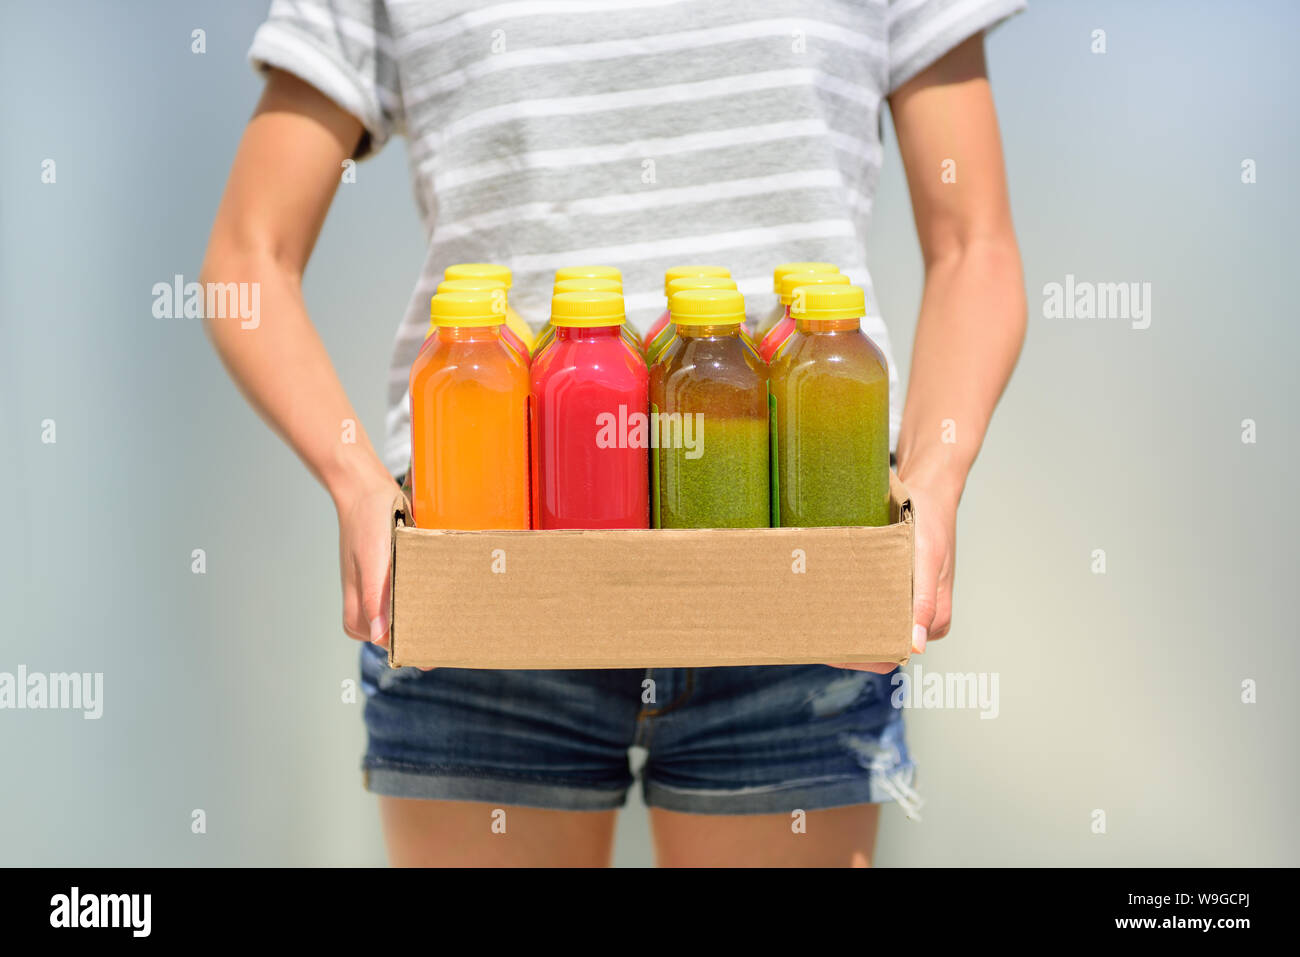 Woman holding delivery box of freshly cold pressed fruit and vegetable juice bottles. Closeup of female person carrying organic raw juices. Juicing is a food trend for diet cleanse detox. Stock Photo